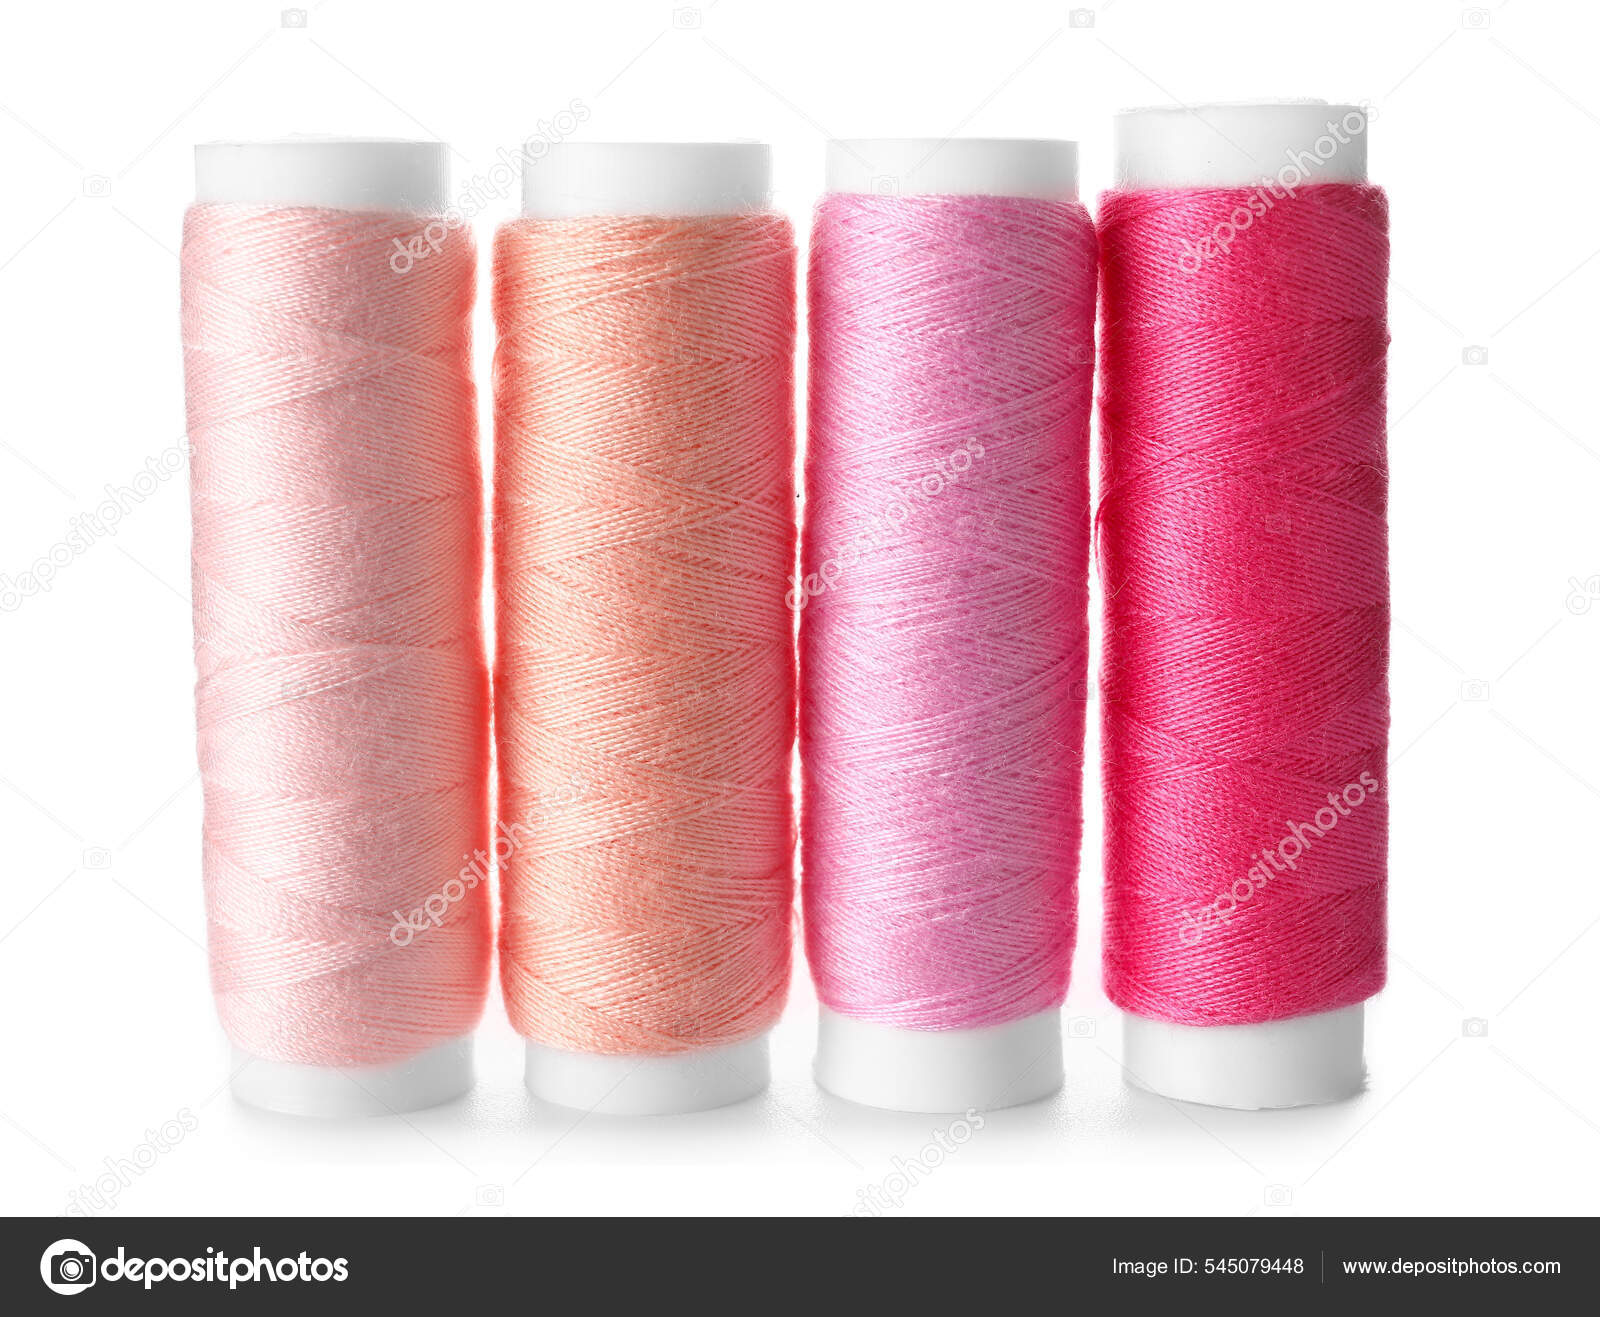 Multicolored Sewing Thread Spools White Background Stock Photo by ©serezniy  545079448